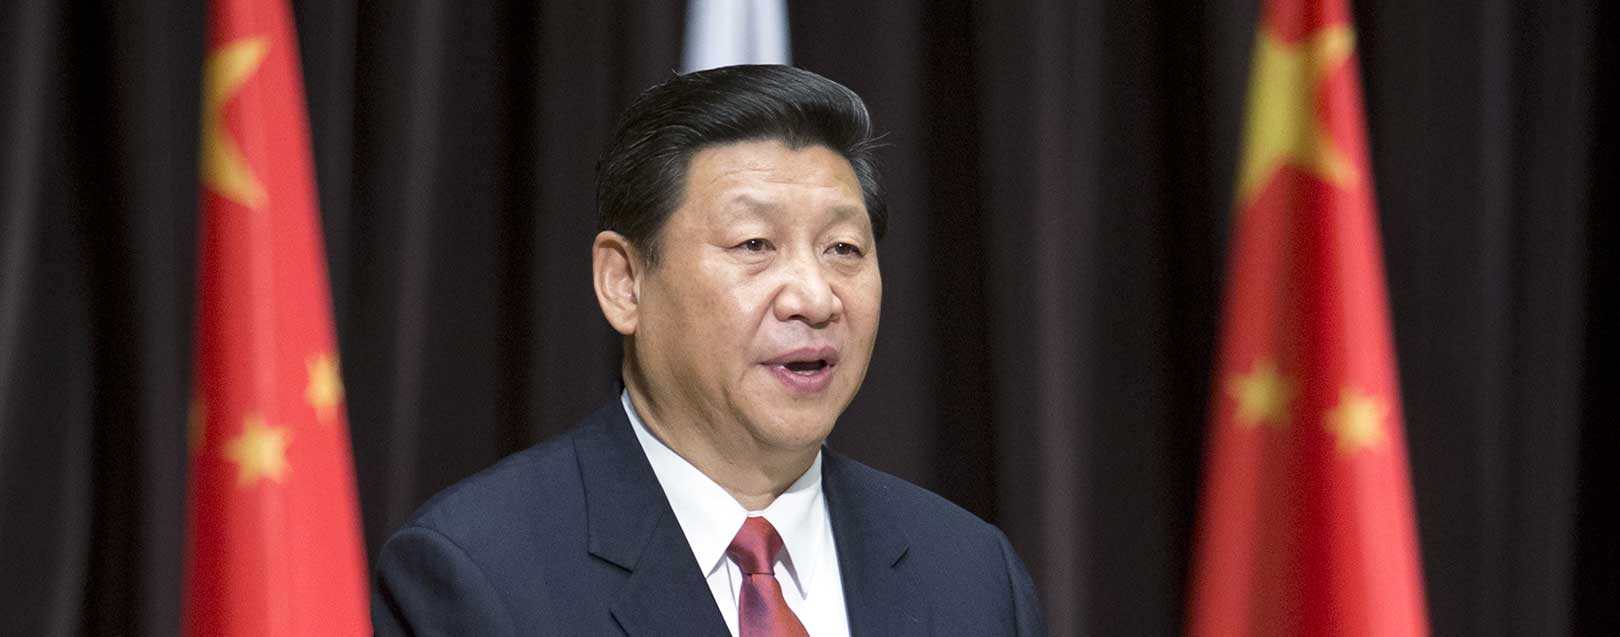 Developing nations have become the main engine of growth: Xi